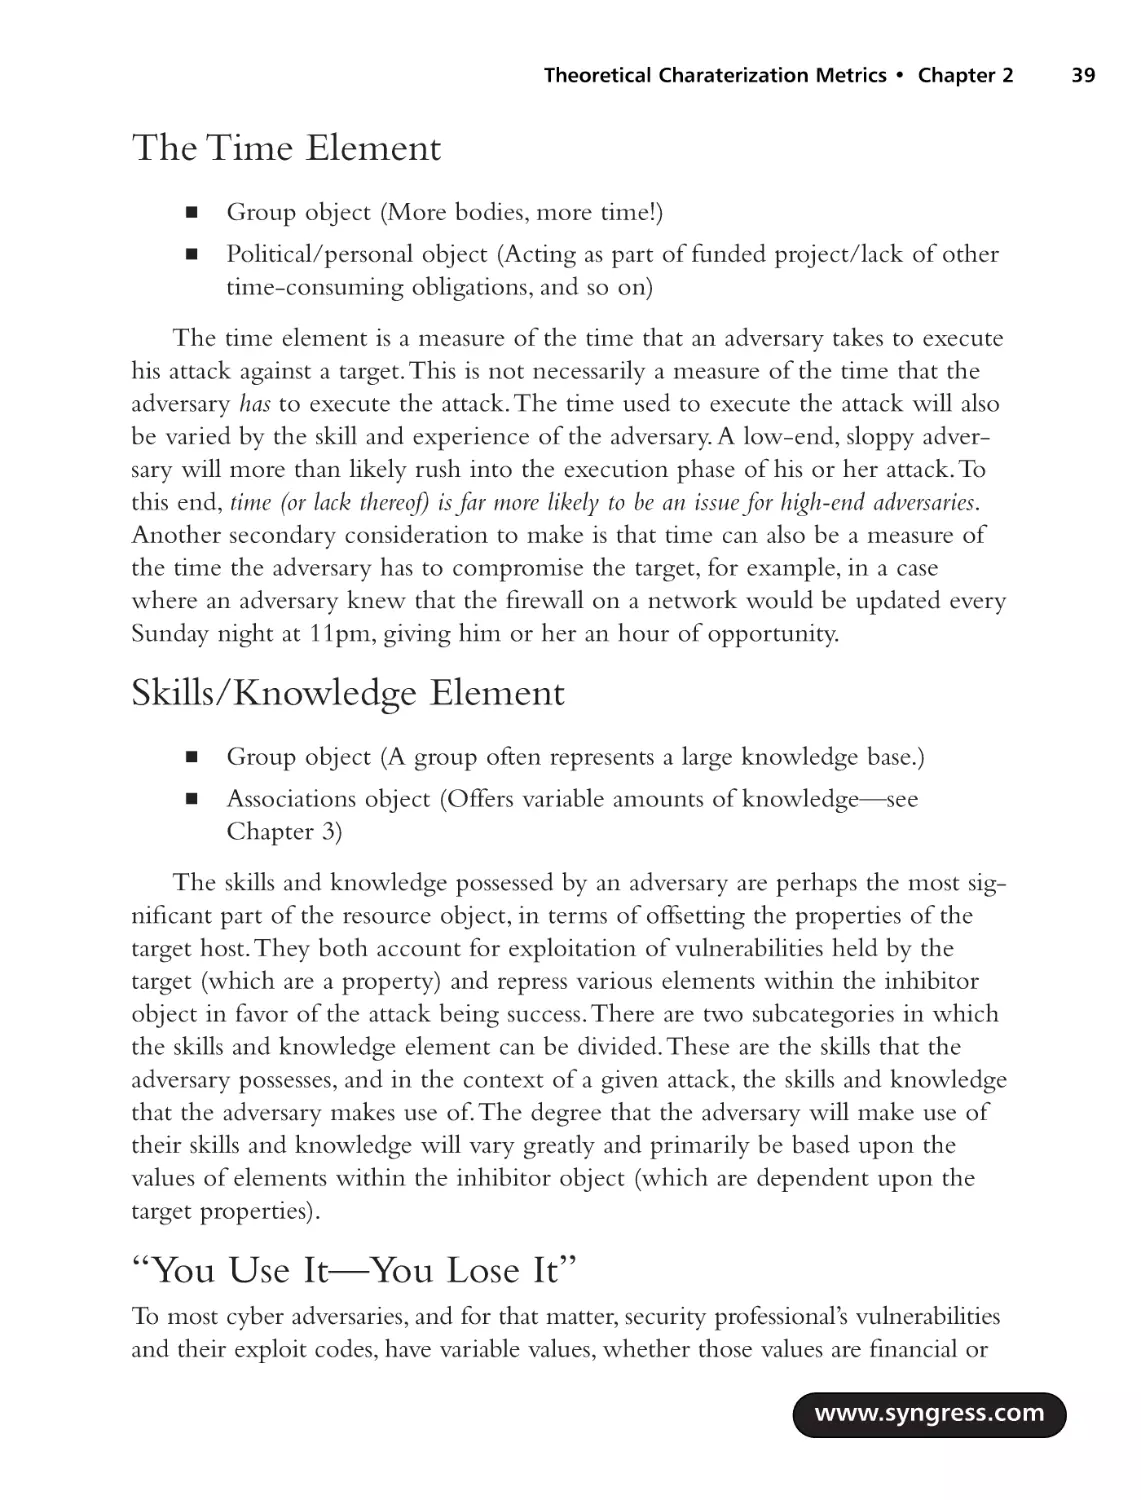 The Time Element
Skills/Knowledge Element
"You Use It-You Lose It"